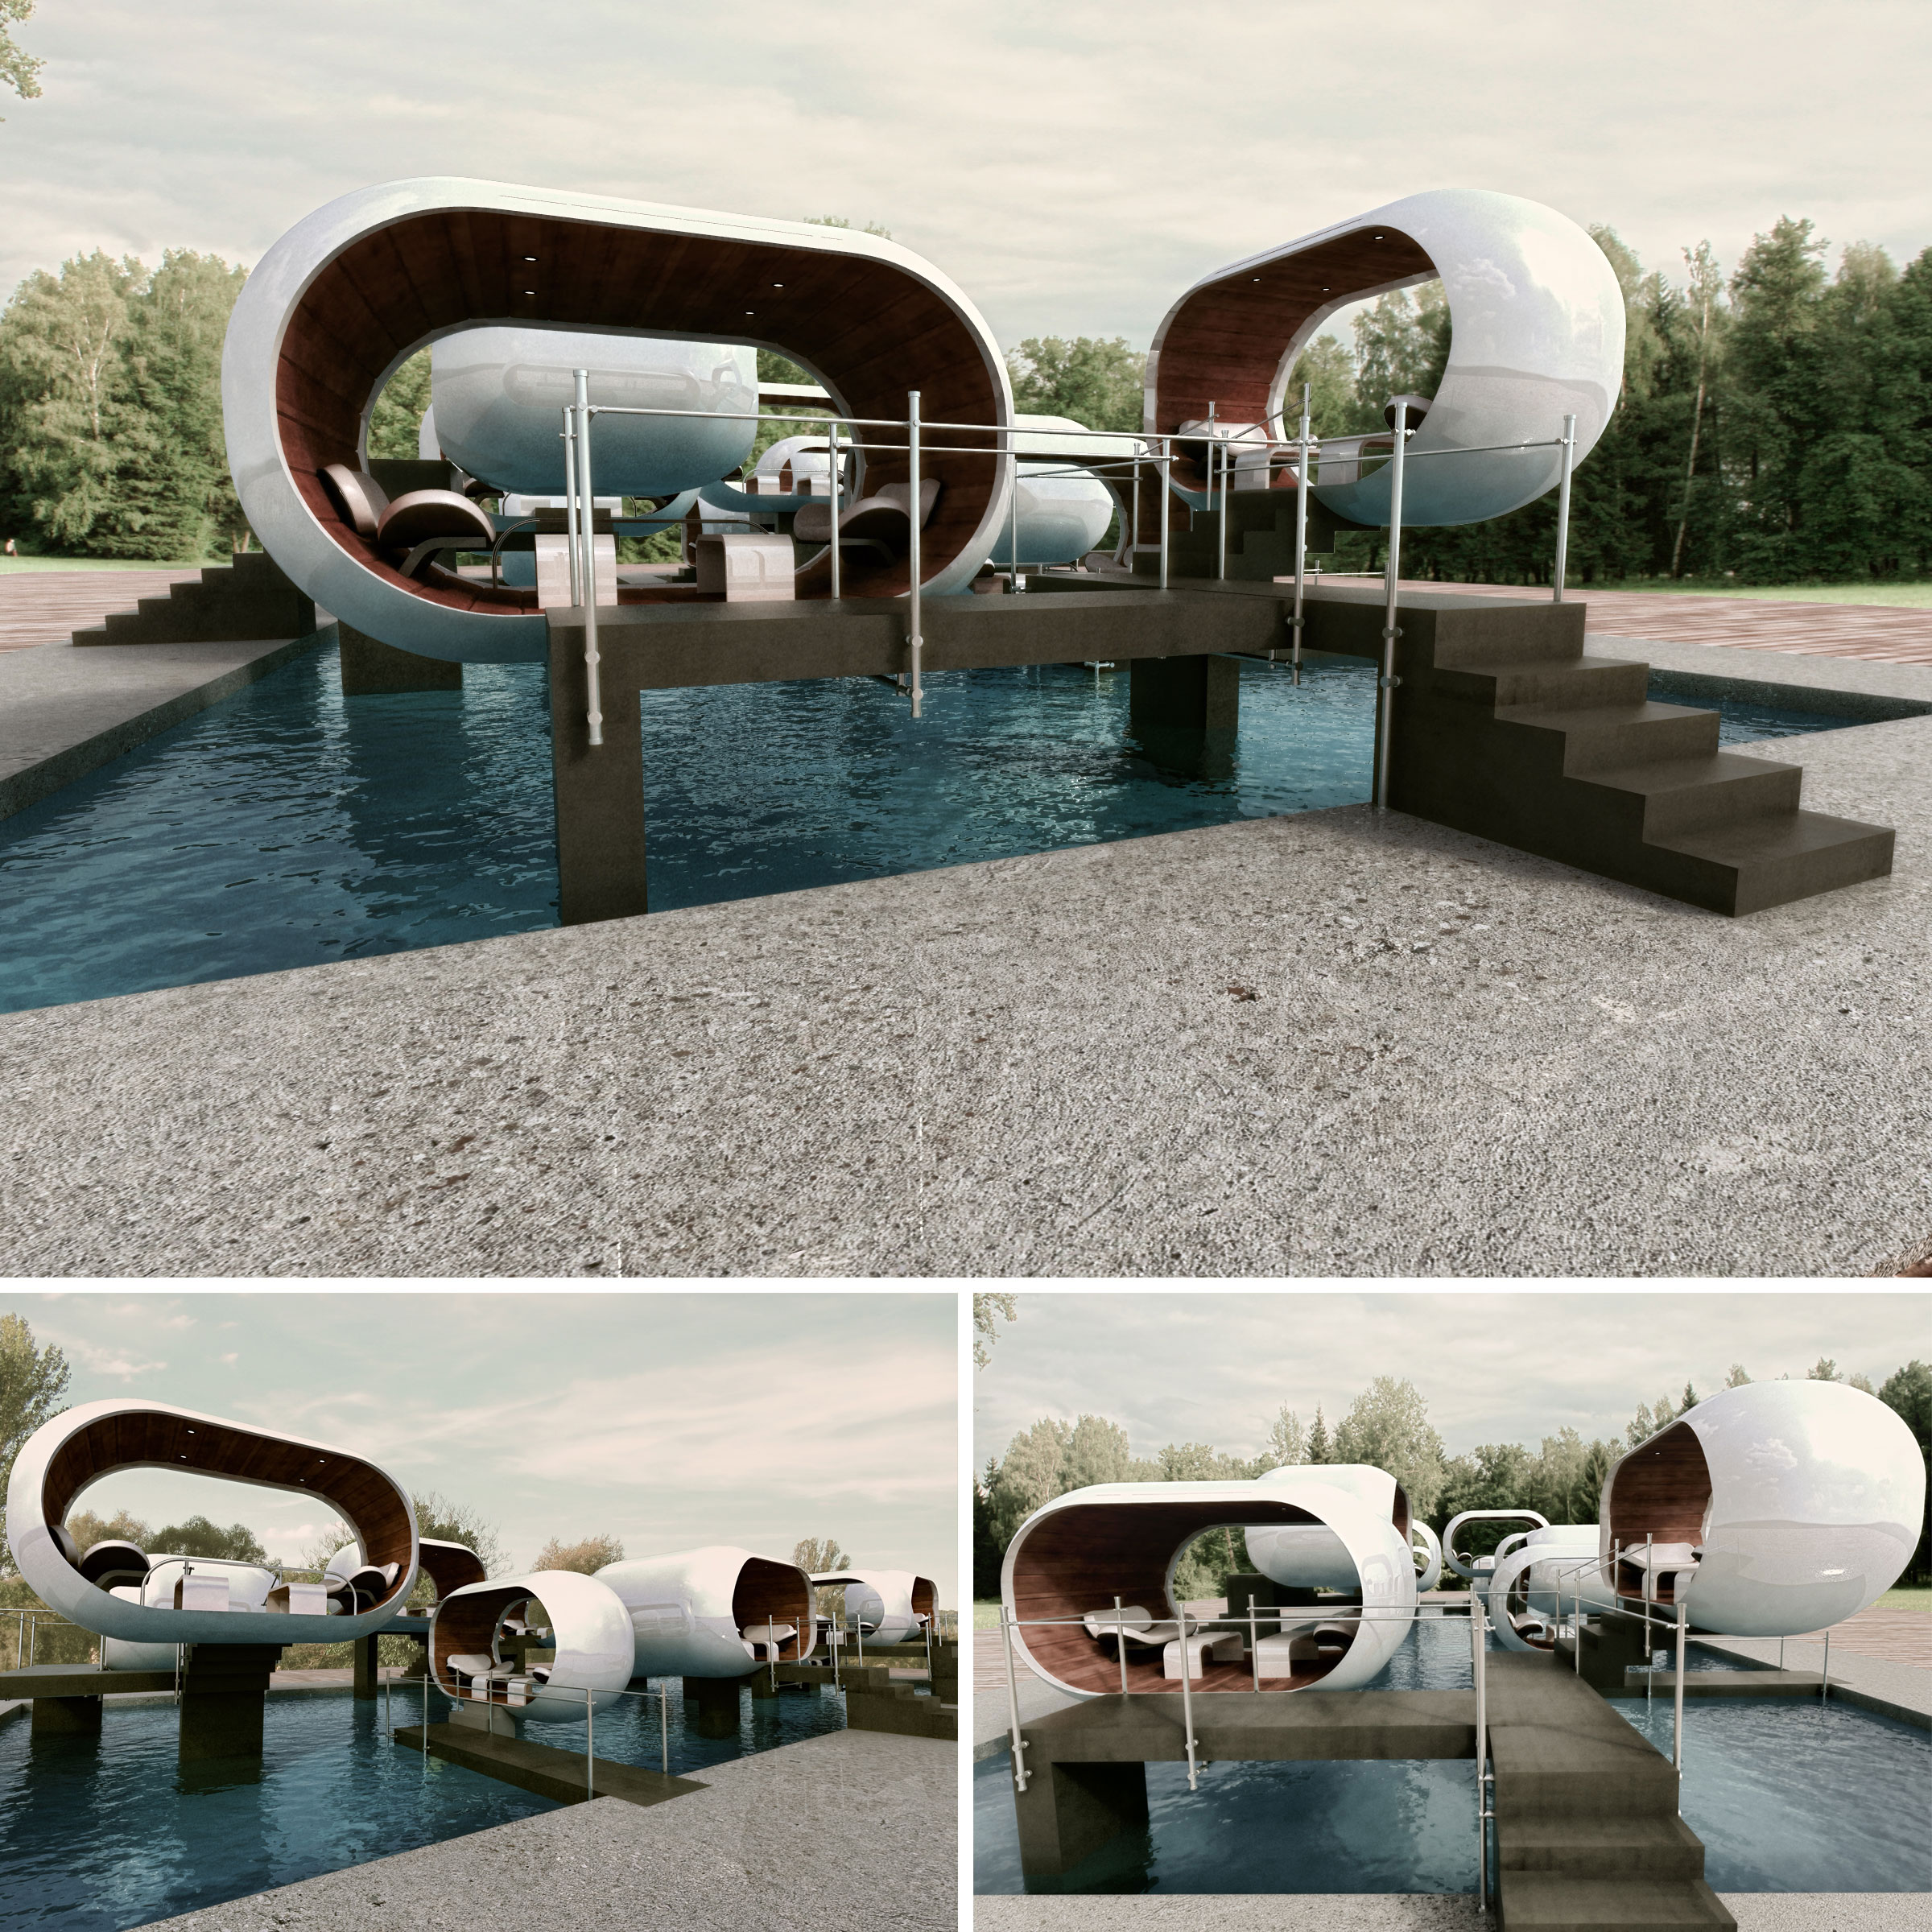 Perspective view of 'bubbles' Architectural design